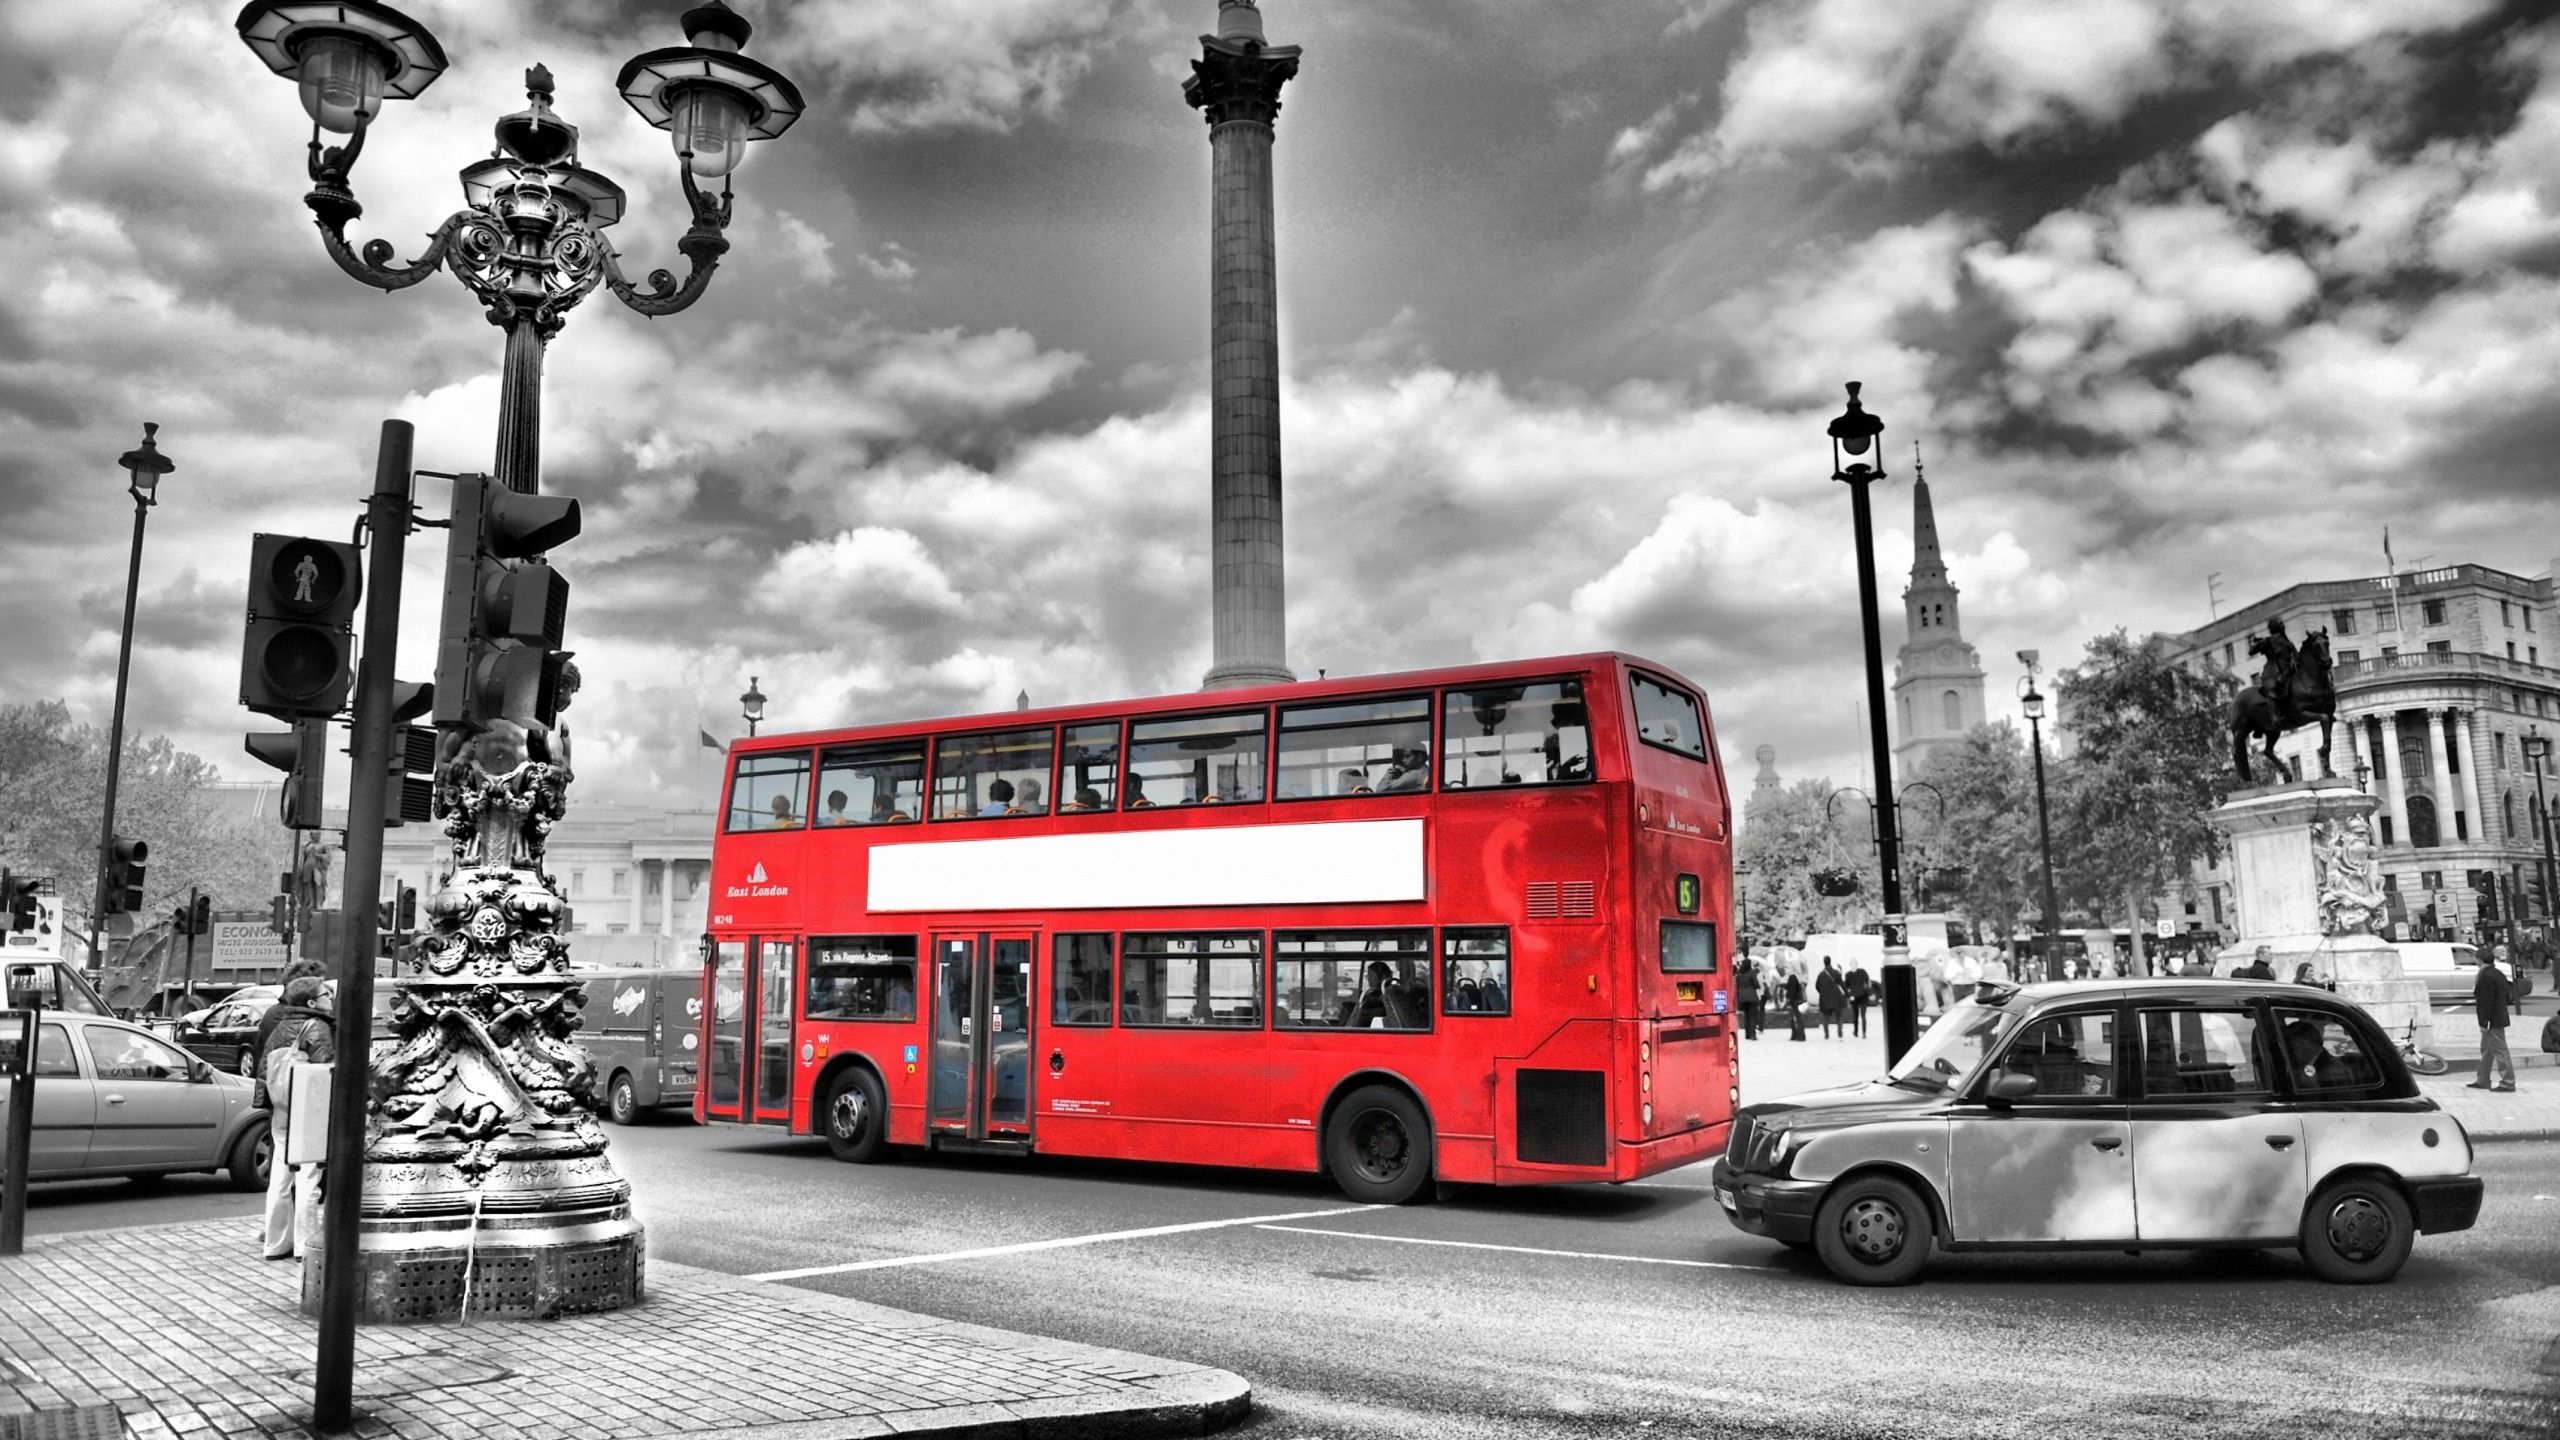 Black and White London for 2560x1440 HDTV resolution